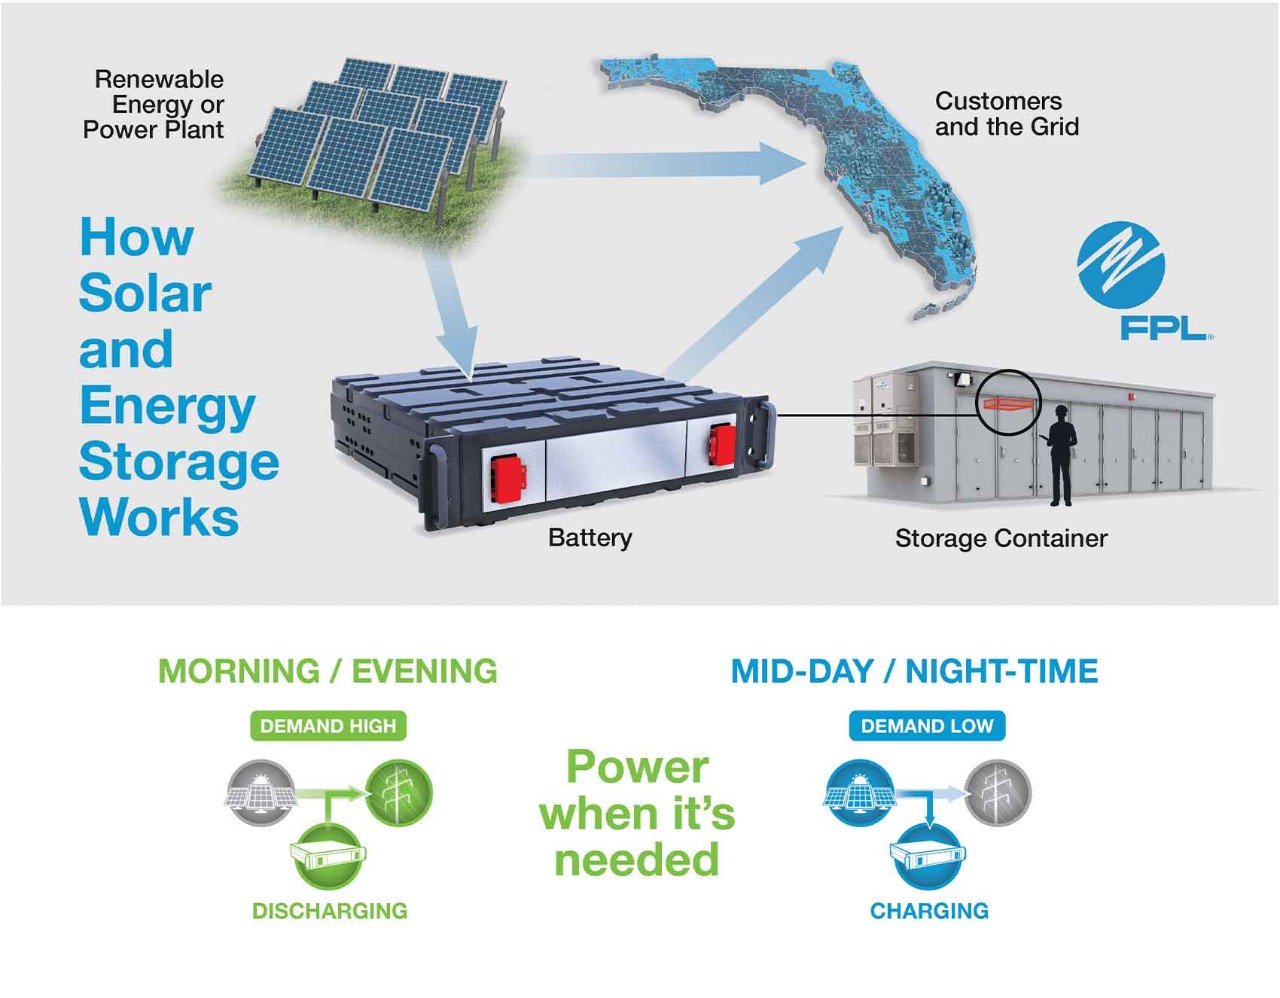 https://www.fpl.com/content/fplgp/us/en/energy-my-way/battery-storage/_jcr_content/root/responsivegrid/responsivegrid_18484/responsivegrid/image_1657595813.coreimg.jpeg/1631899689911/how-solar-and-battery-storage-work-graphic.jpeg